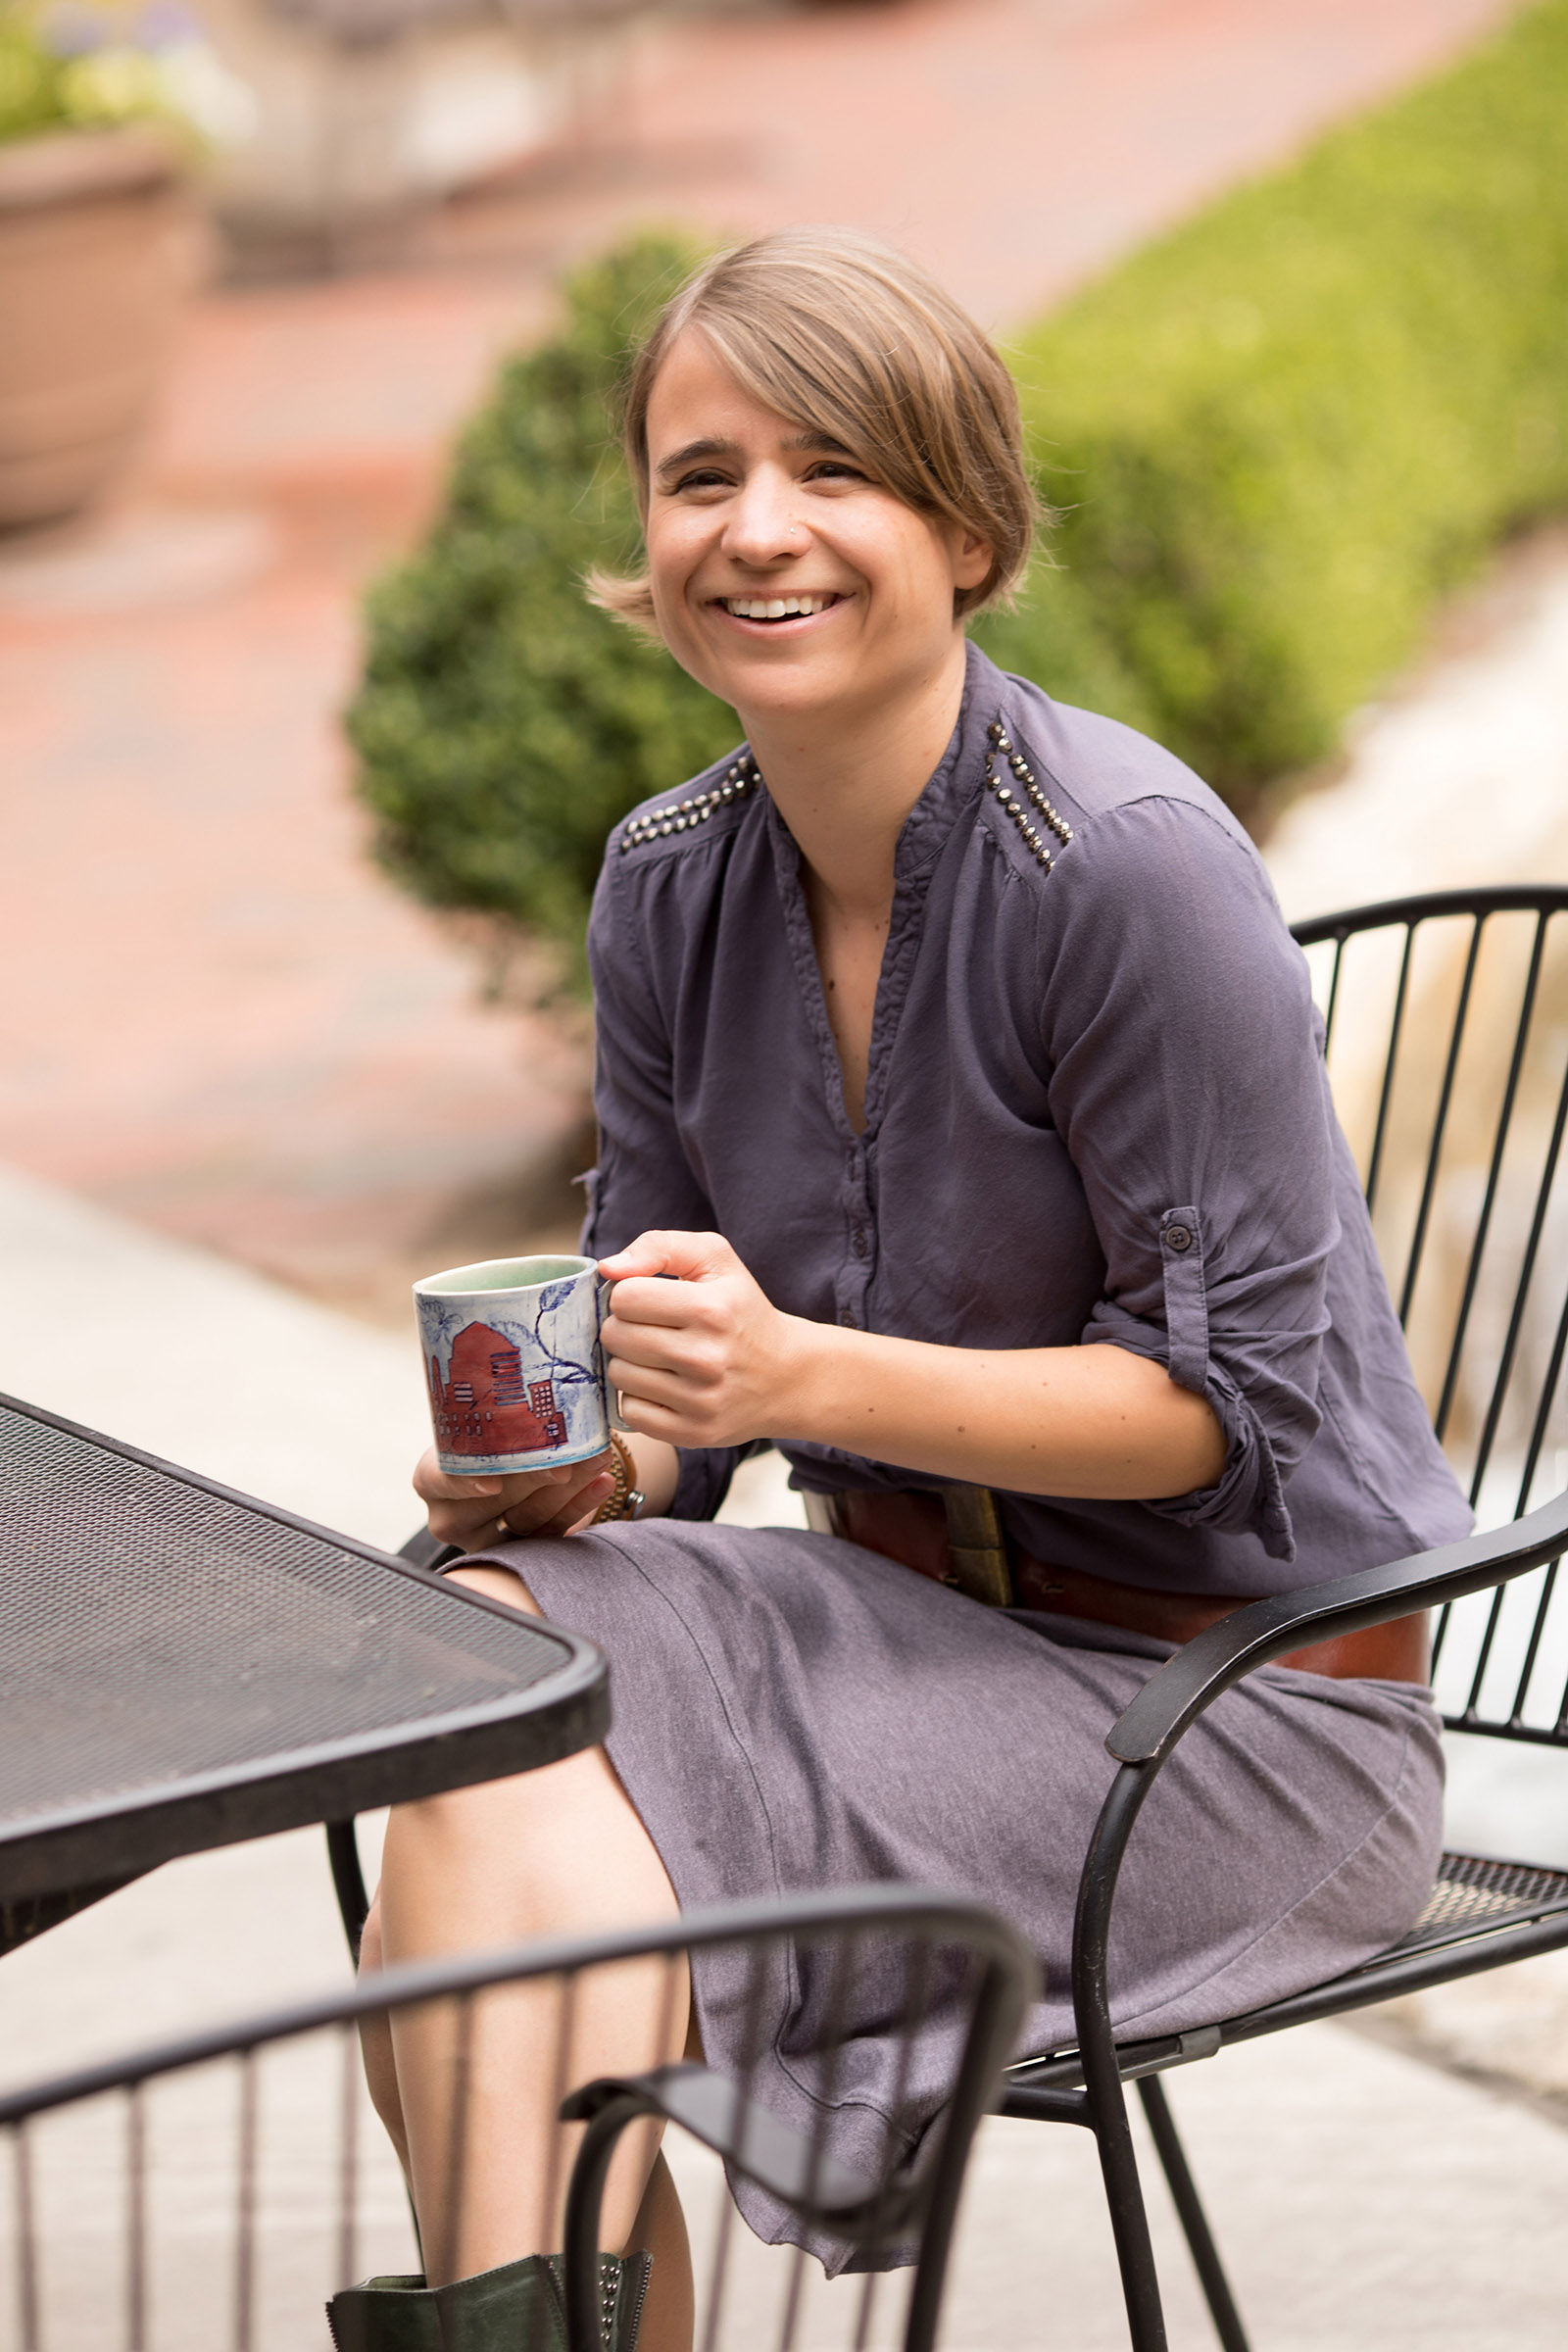 A woman sits at a patio table holding a mug and laughing